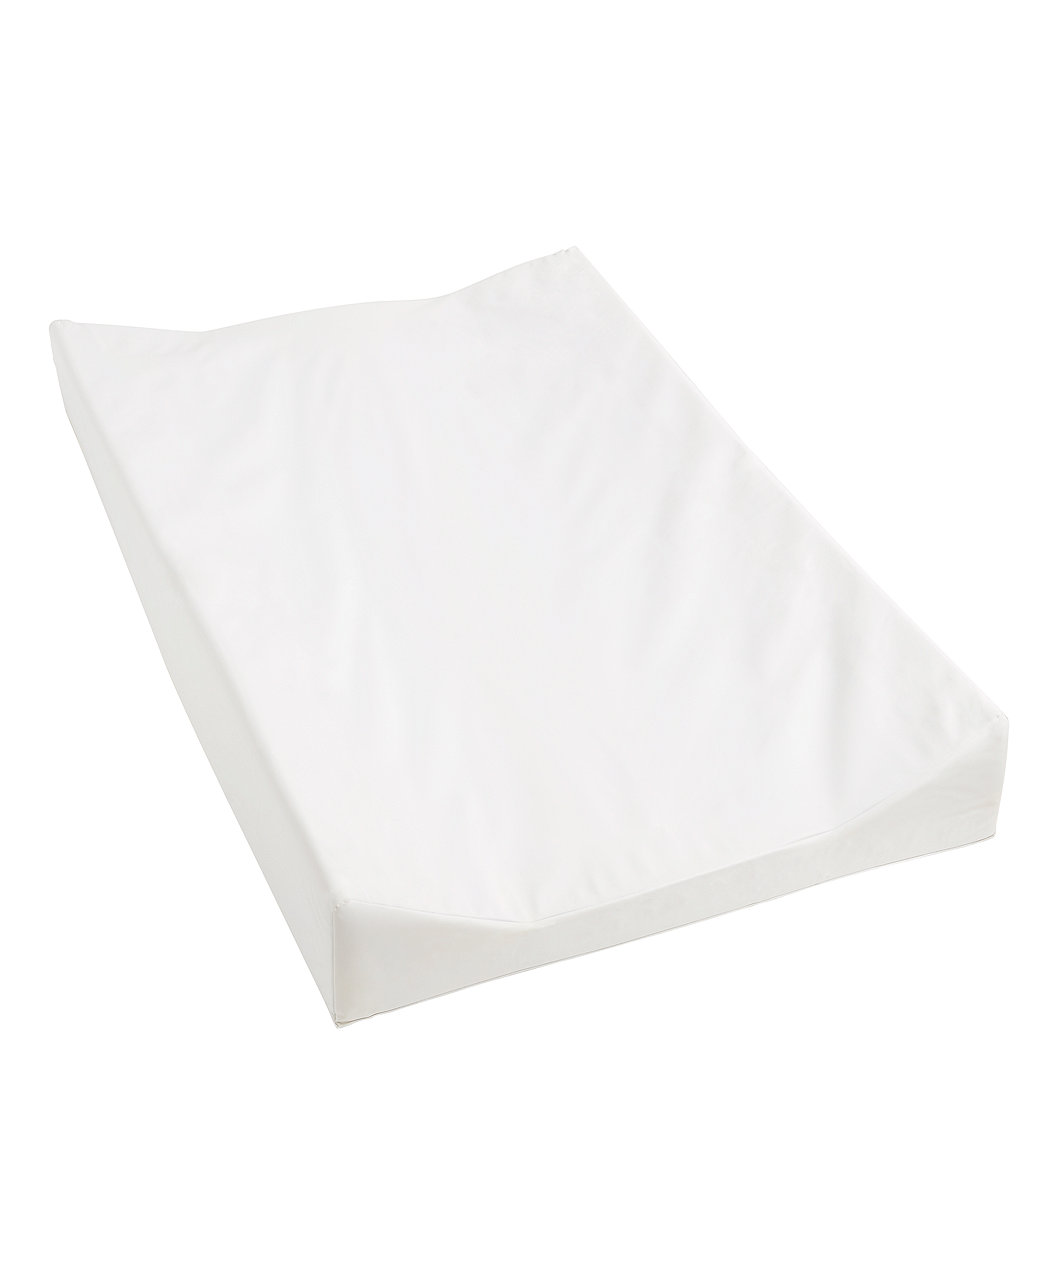 Mothercare Wedge Shaped Changing Mat